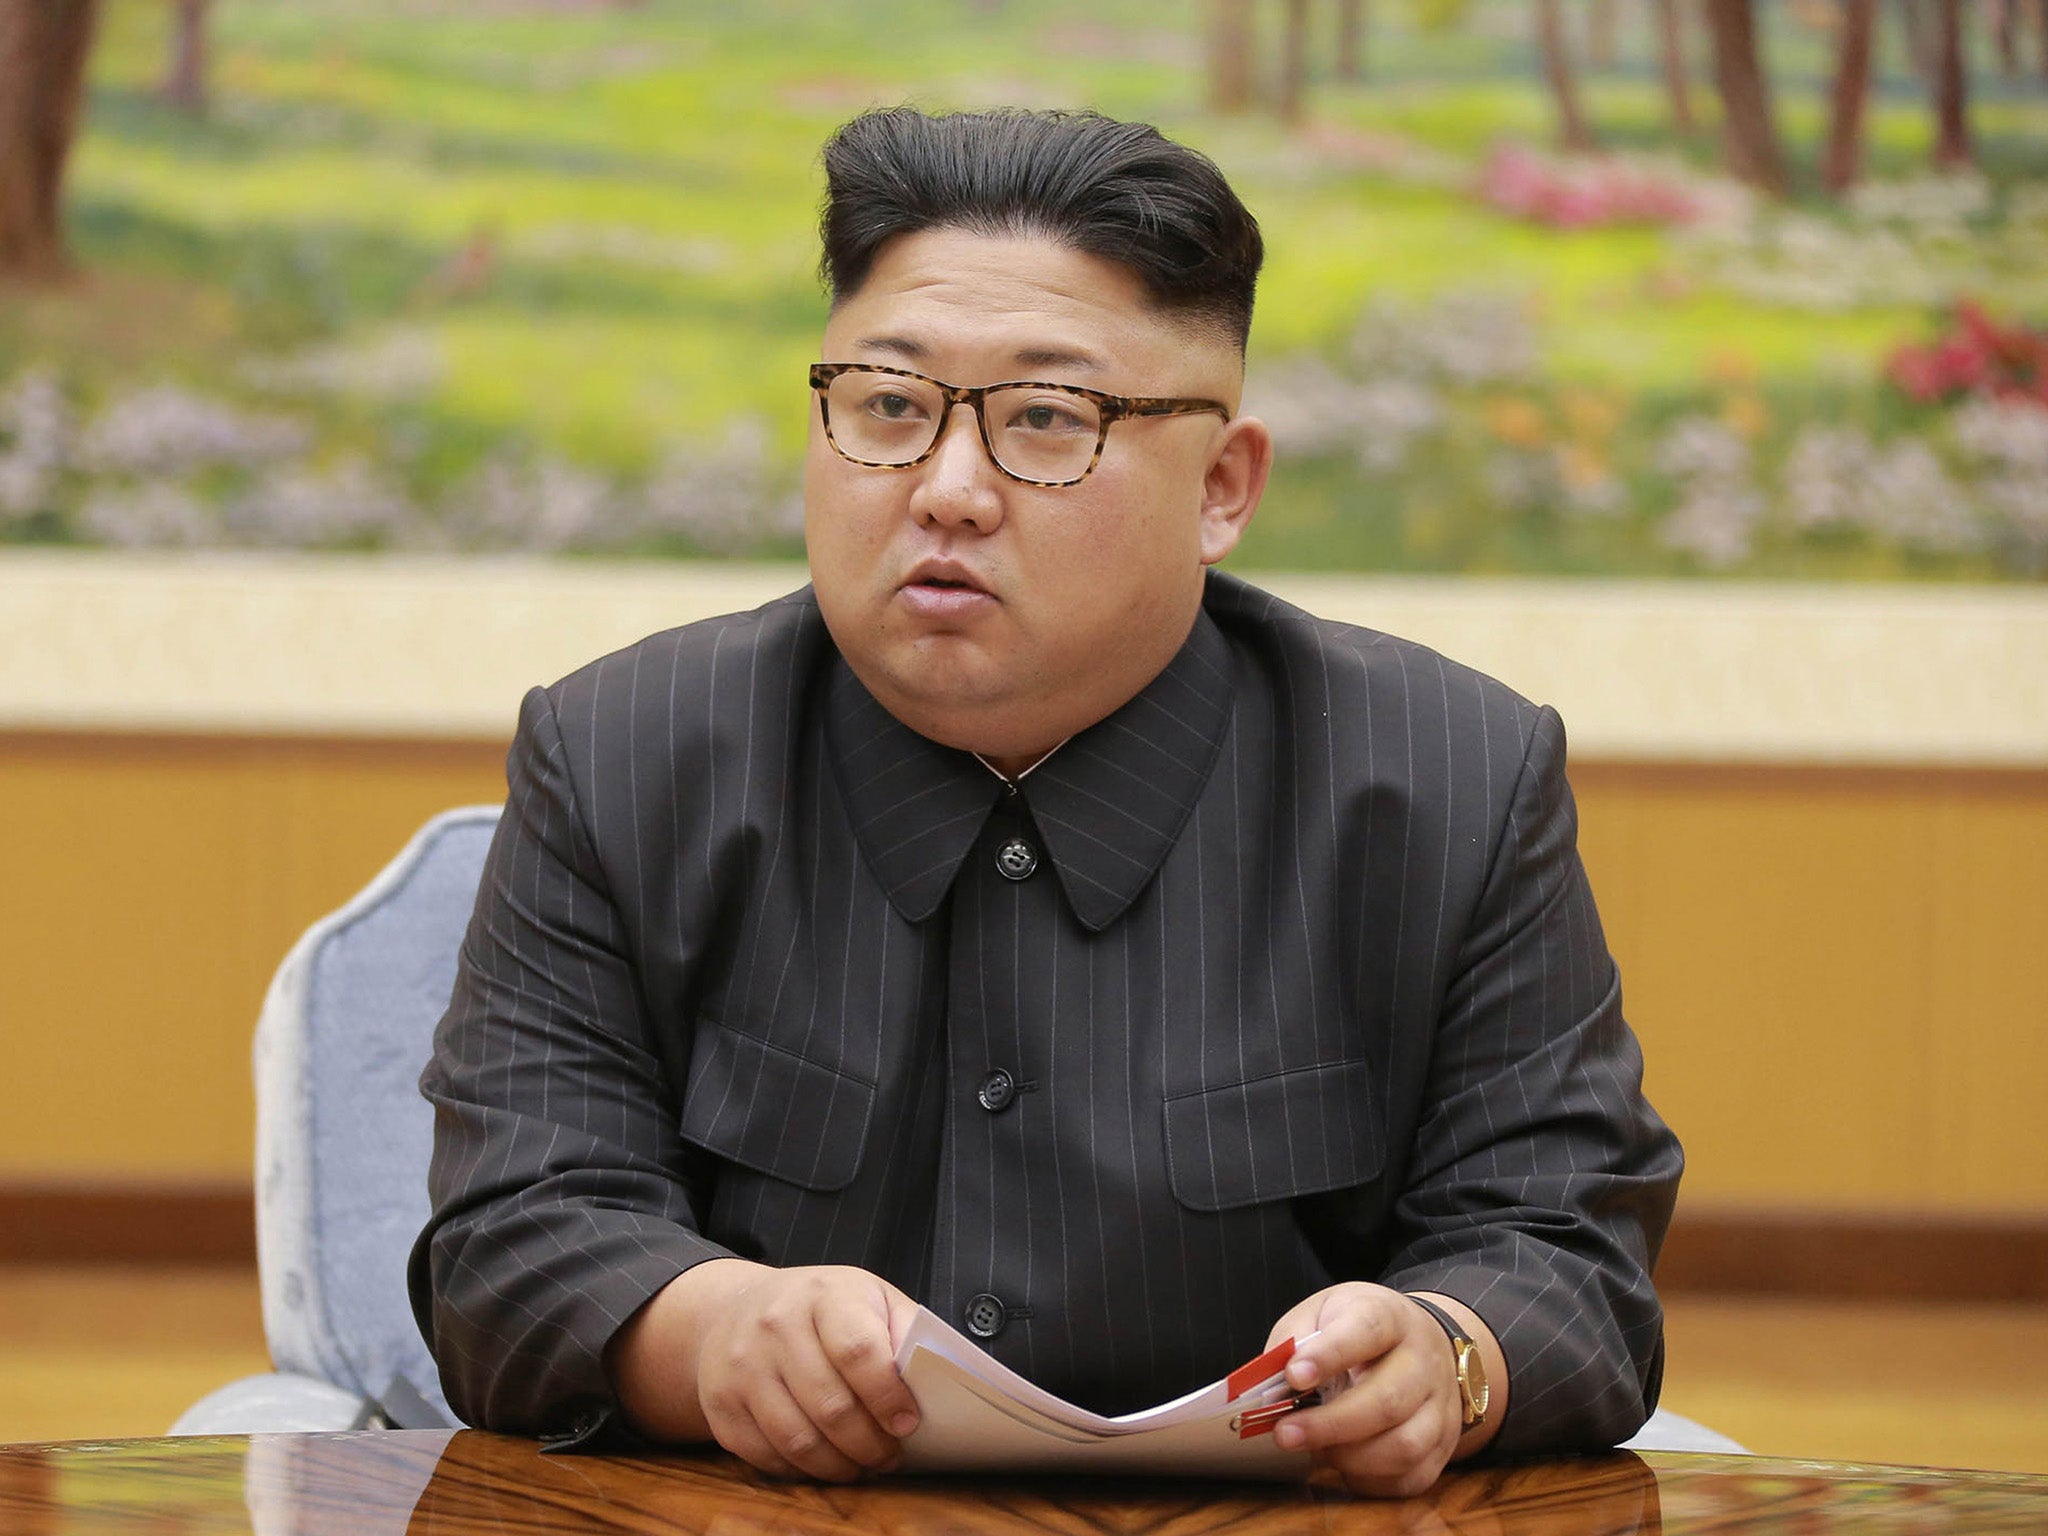 North Korea has previously claimed the US and South Korea have hatched a plot to topple their Supreme Leader